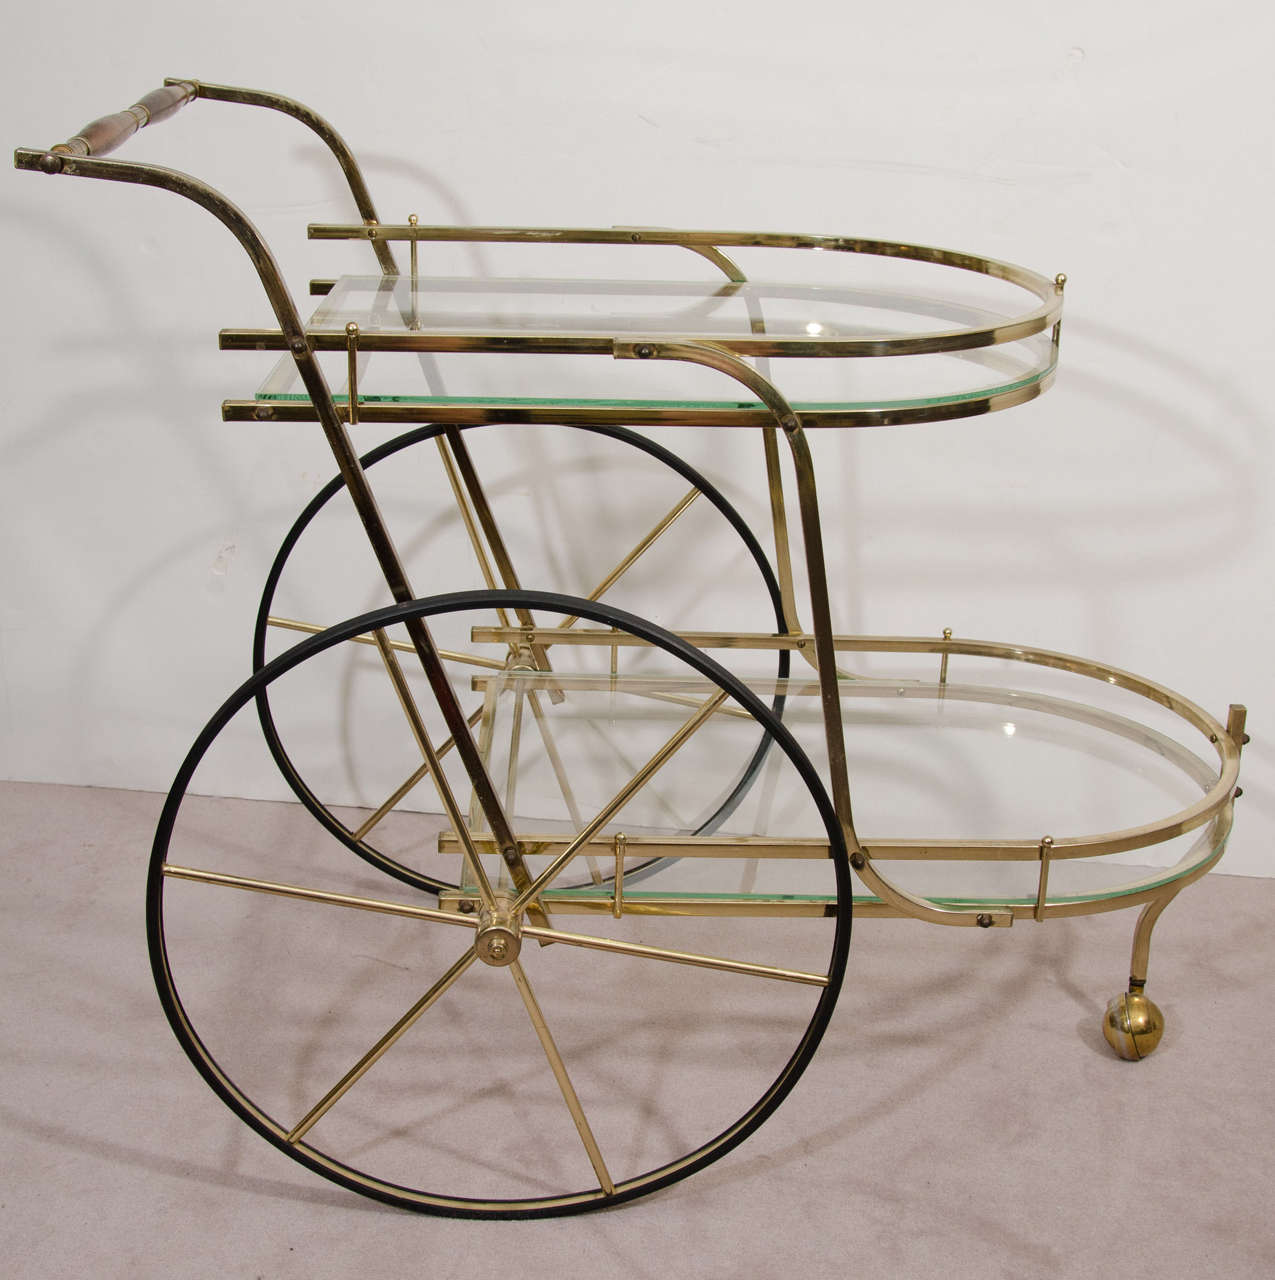 A vintage three-wheeled brass bar cart with two glass tiers, and a push cart style handle bar with wooden accents.

Good vintage condition with age appropriate wear. A few minor scratches to the glass.

Reduced from: $1,850